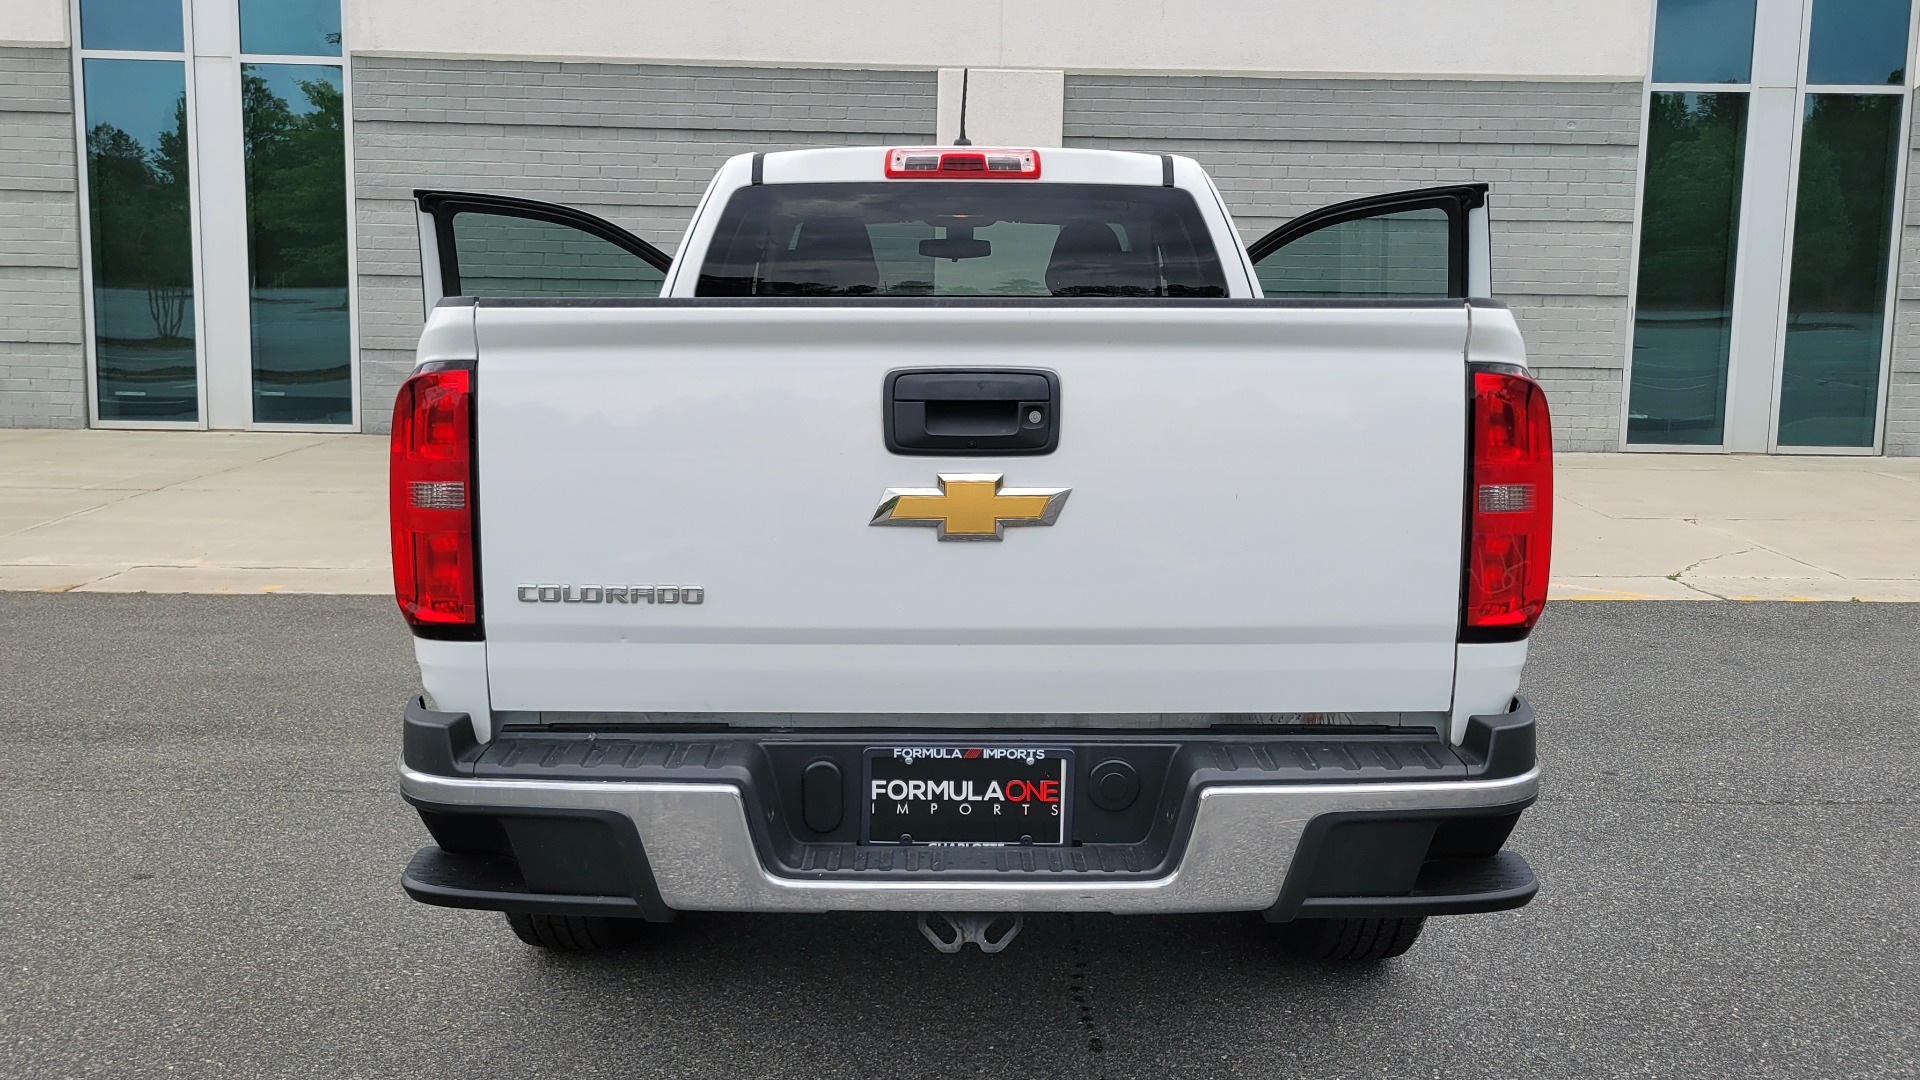 Used 2018 Chevrolet COLORADO EXT CAB / 2.5L / 2WD / 6-SPD AUTO / WORK TRUCK / REARVIEW for sale Sold at Formula Imports in Charlotte NC 28227 12